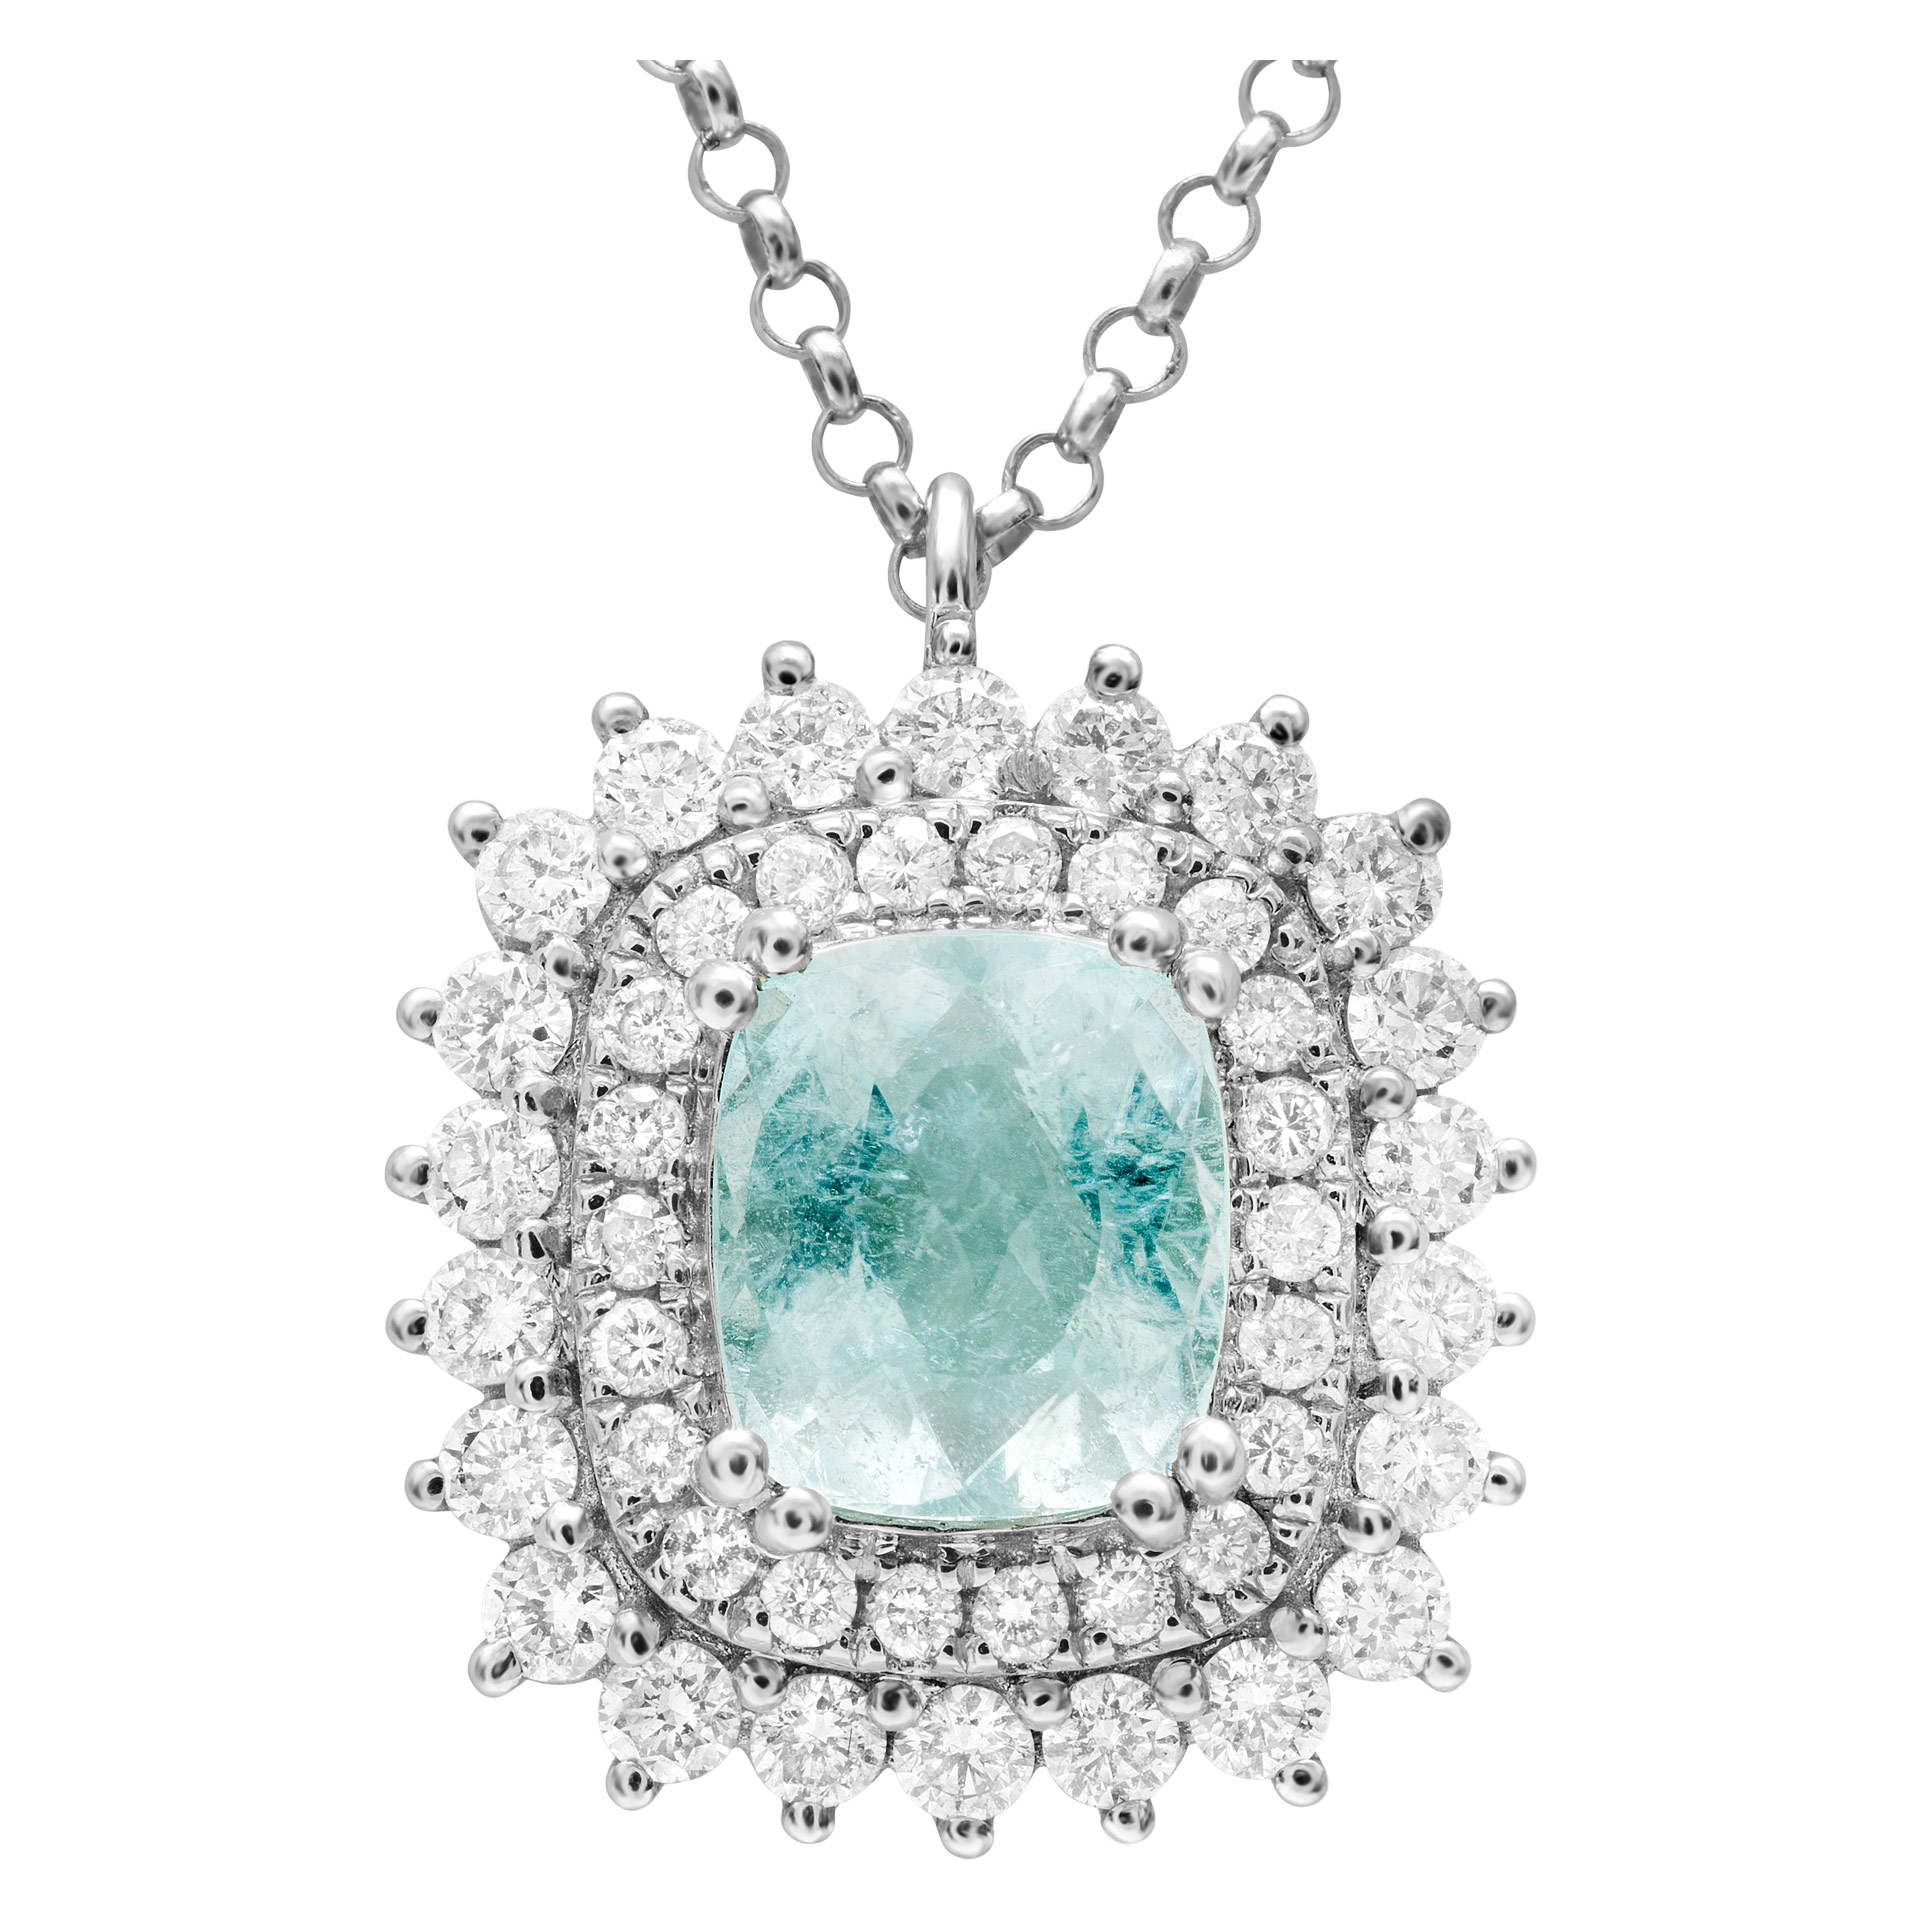 Diamond and Paraiba Tourmaline pendant with chain in 18K WG with 0.63 cts diam & 0.69 cts tourm